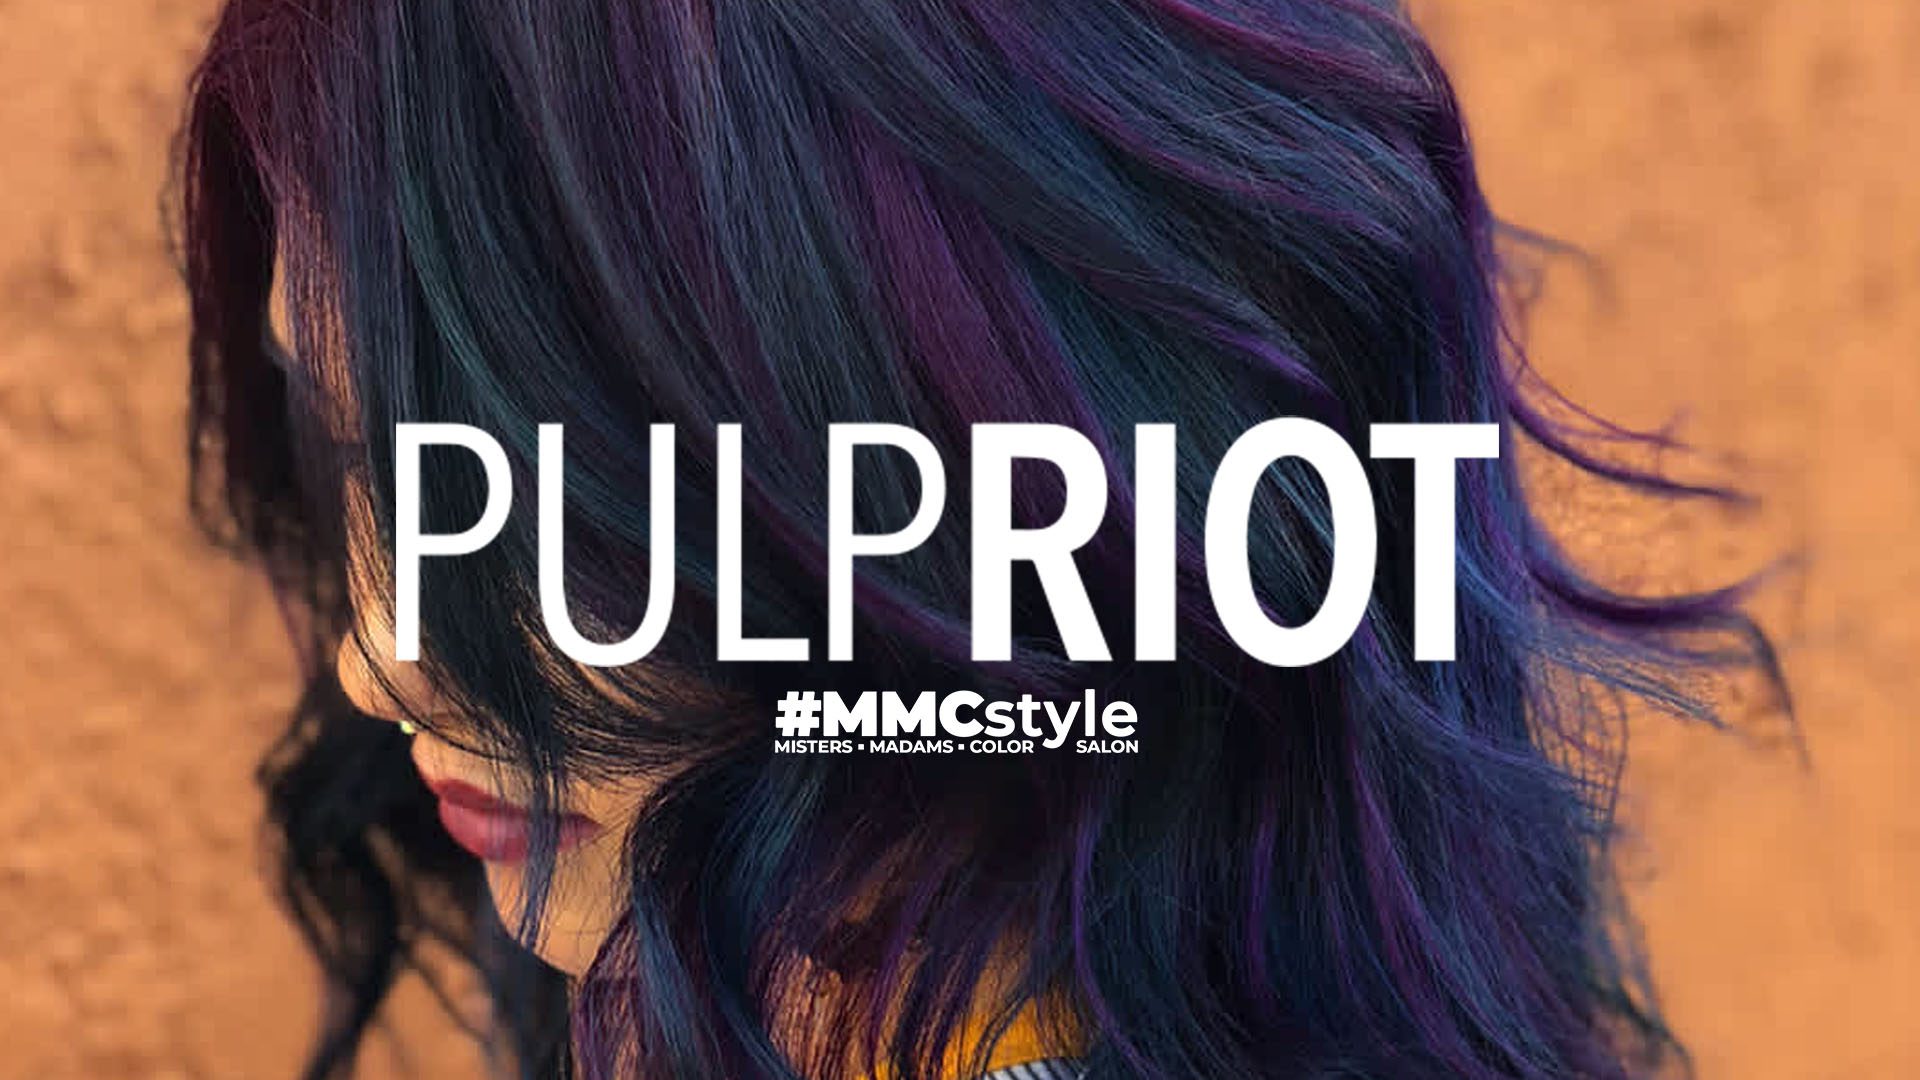 The perfect time of year to be a Pulp Riot hair color salon